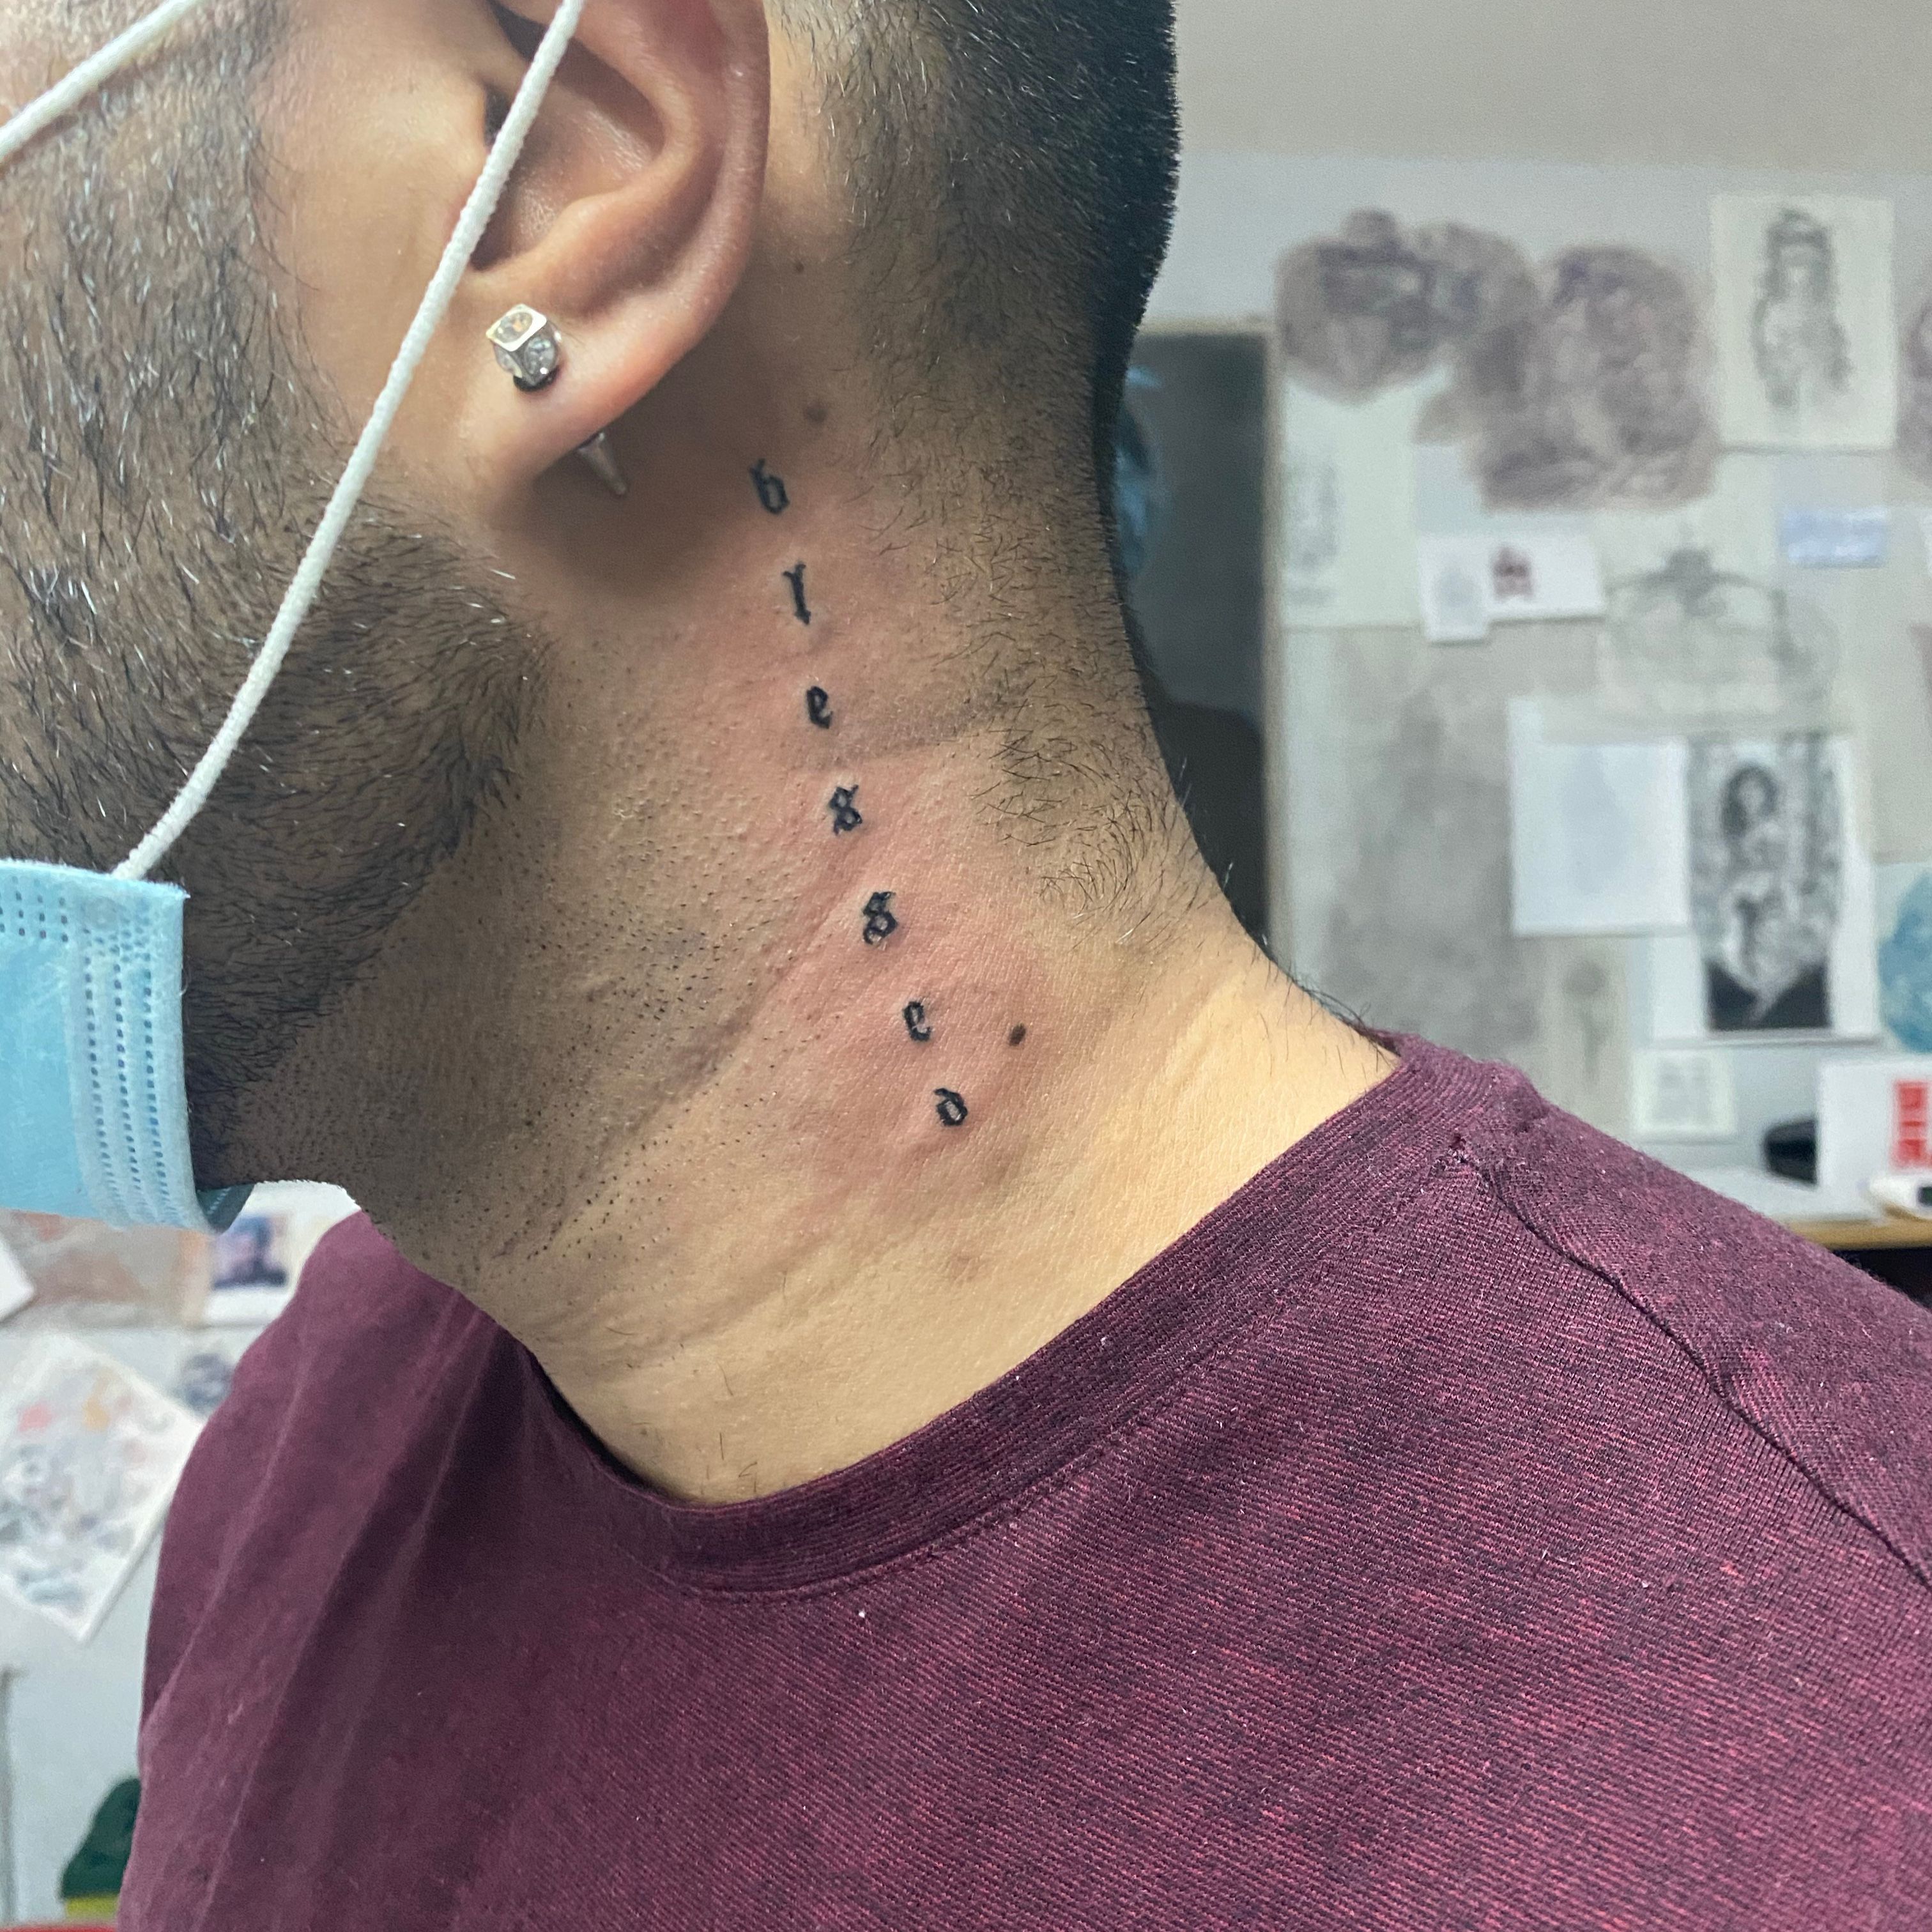 Tattoo uploaded by John D Nguyen (Anu RA) • Blessed text on neck...Thanks for looking. #necktattoos #fonttattoos #letteringtattoos #byjncustoms • Tattoodo